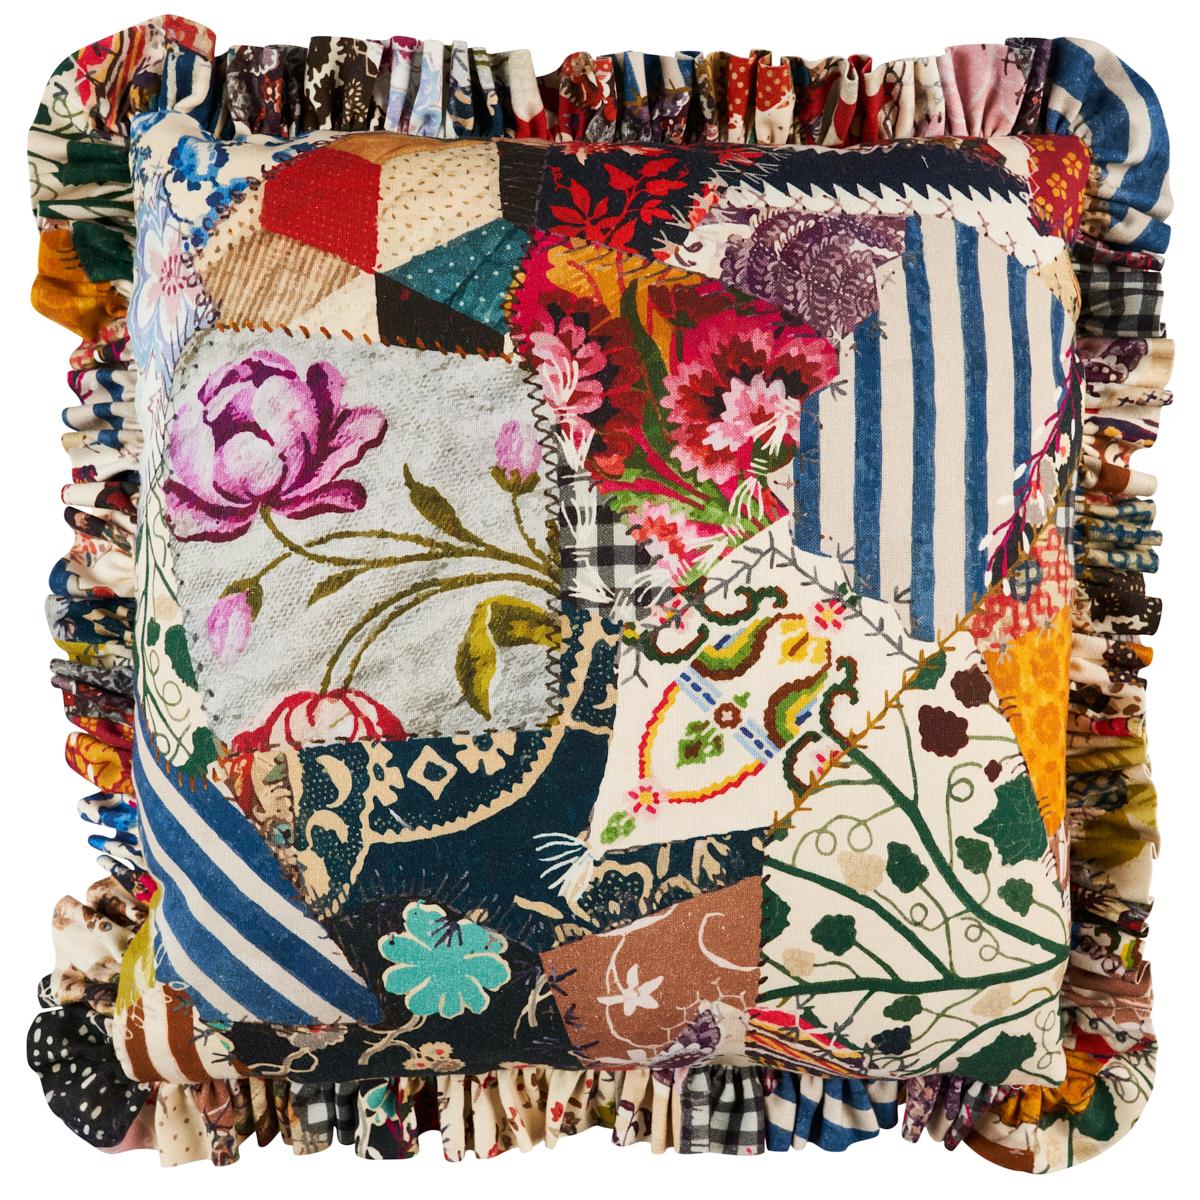 This pillow features Hotch Potch Crazy Quilt by Johnson Hartig for Schumacher with a fringe finish. There is so much to love about Hotch Potch Crazy Quilt, an exuberant, colorful, large-scale design by Johnson Hartig of Libertine. Inspired by